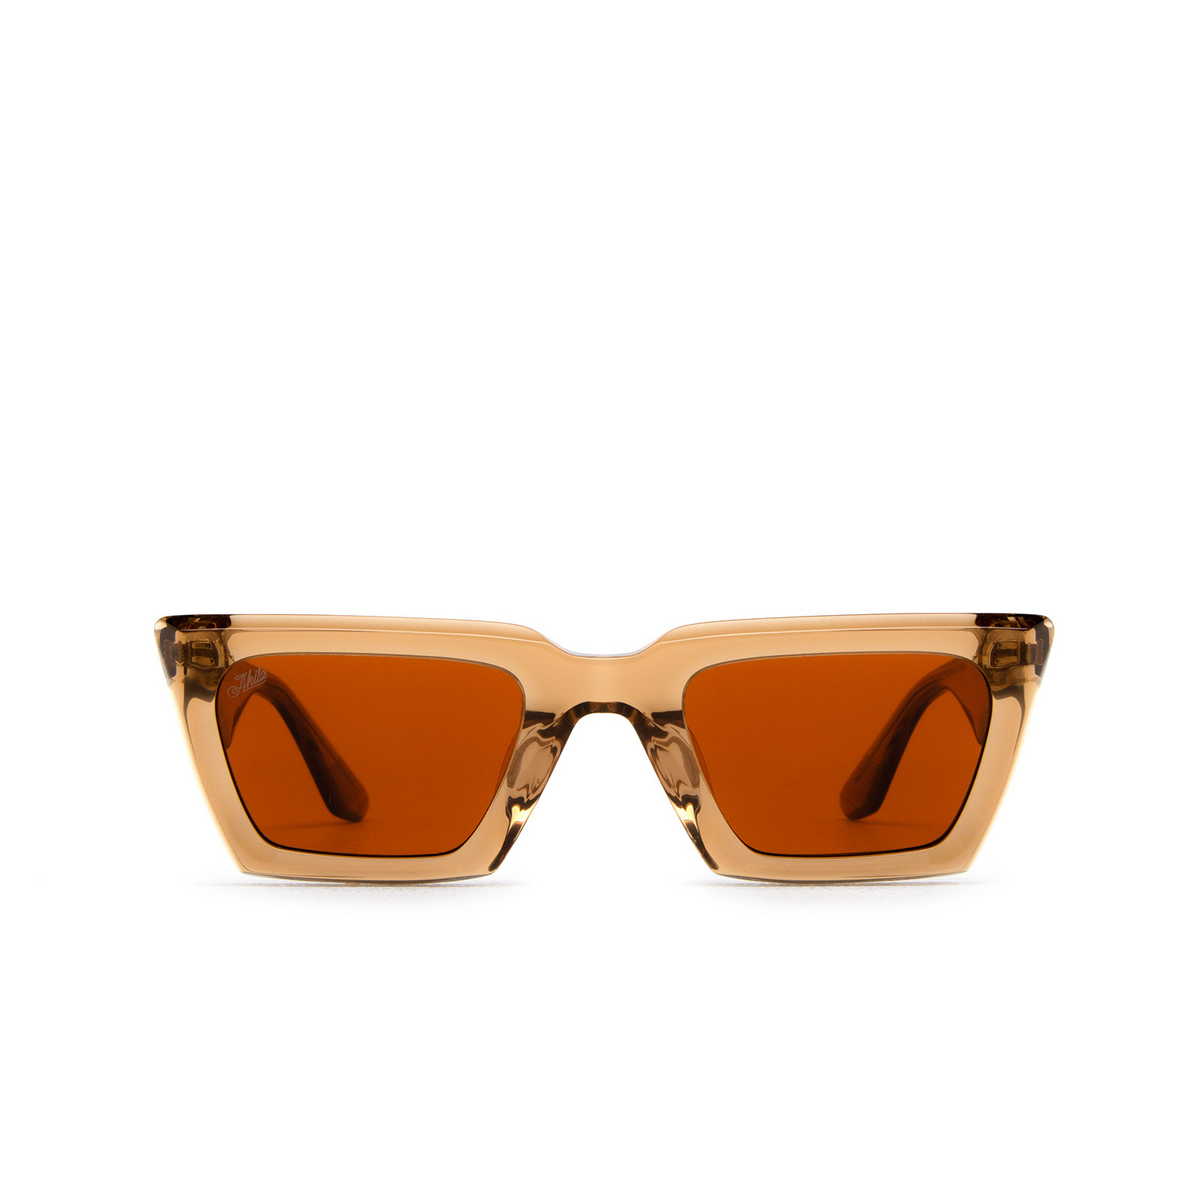 Akila PARADOX Sunglasses 97/96 Brown - front view